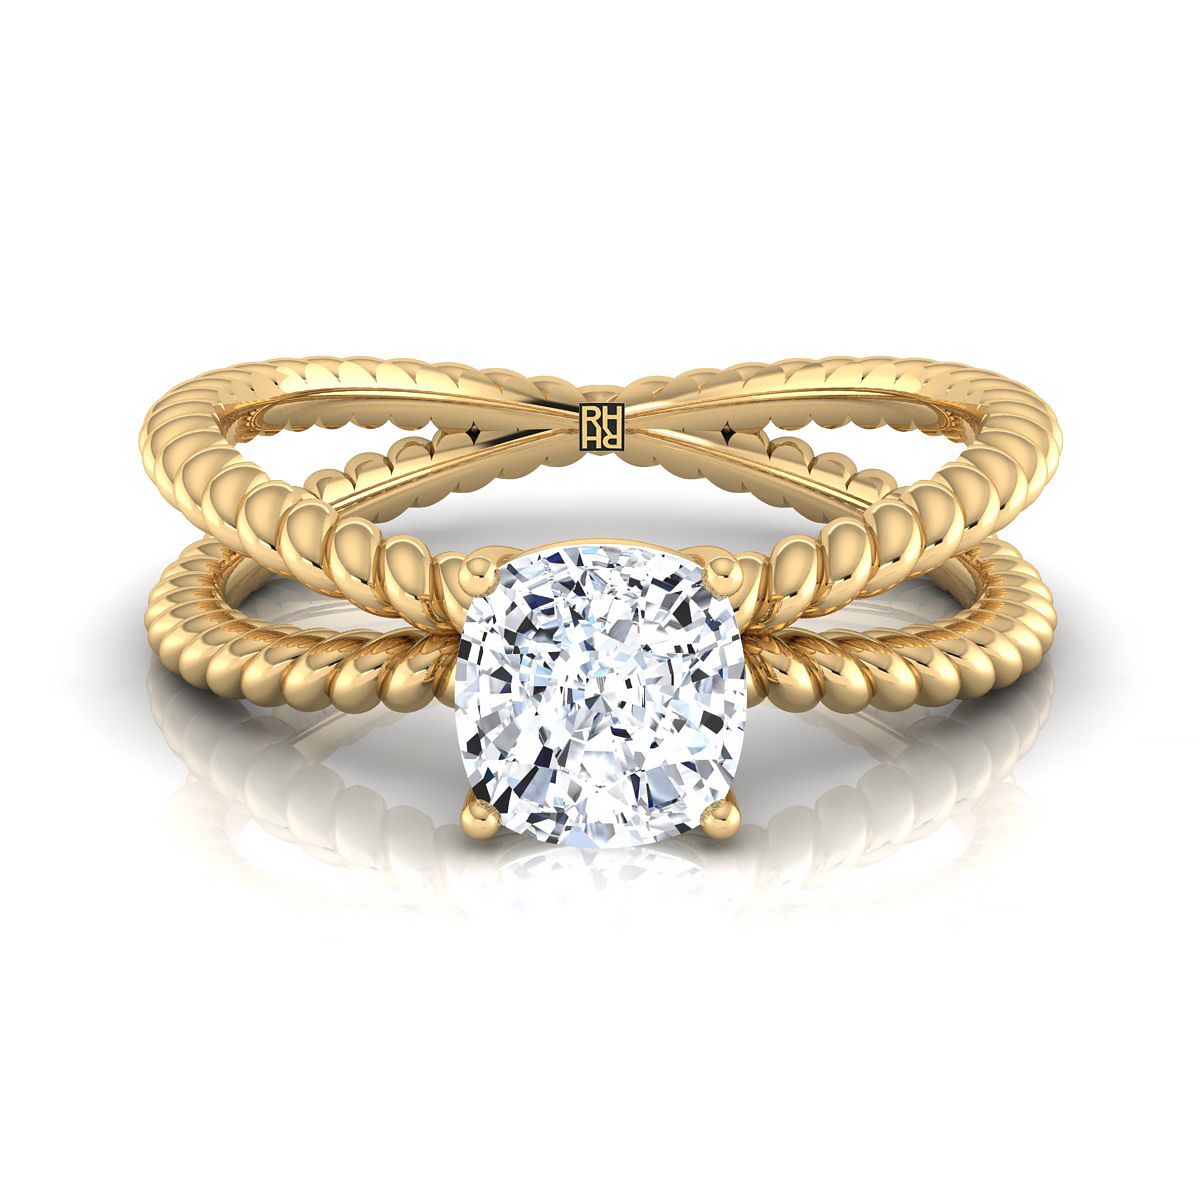 18K Yellow Gold Cushion Criss Cross Twisted Rope Solitaire Engagement Ring